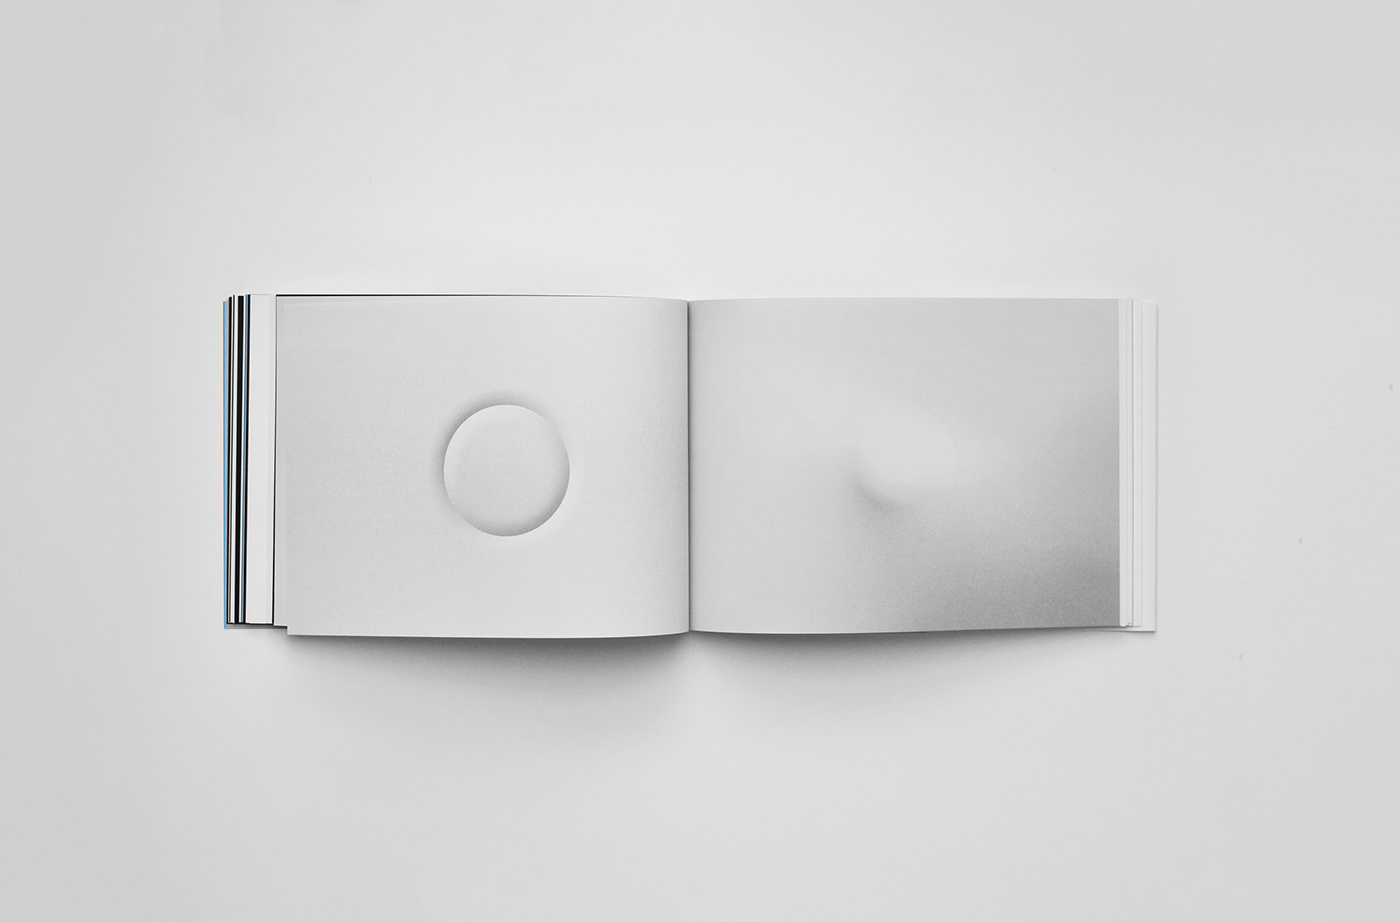 thesis book cover embossed tactile research editorial 3D pale minimal